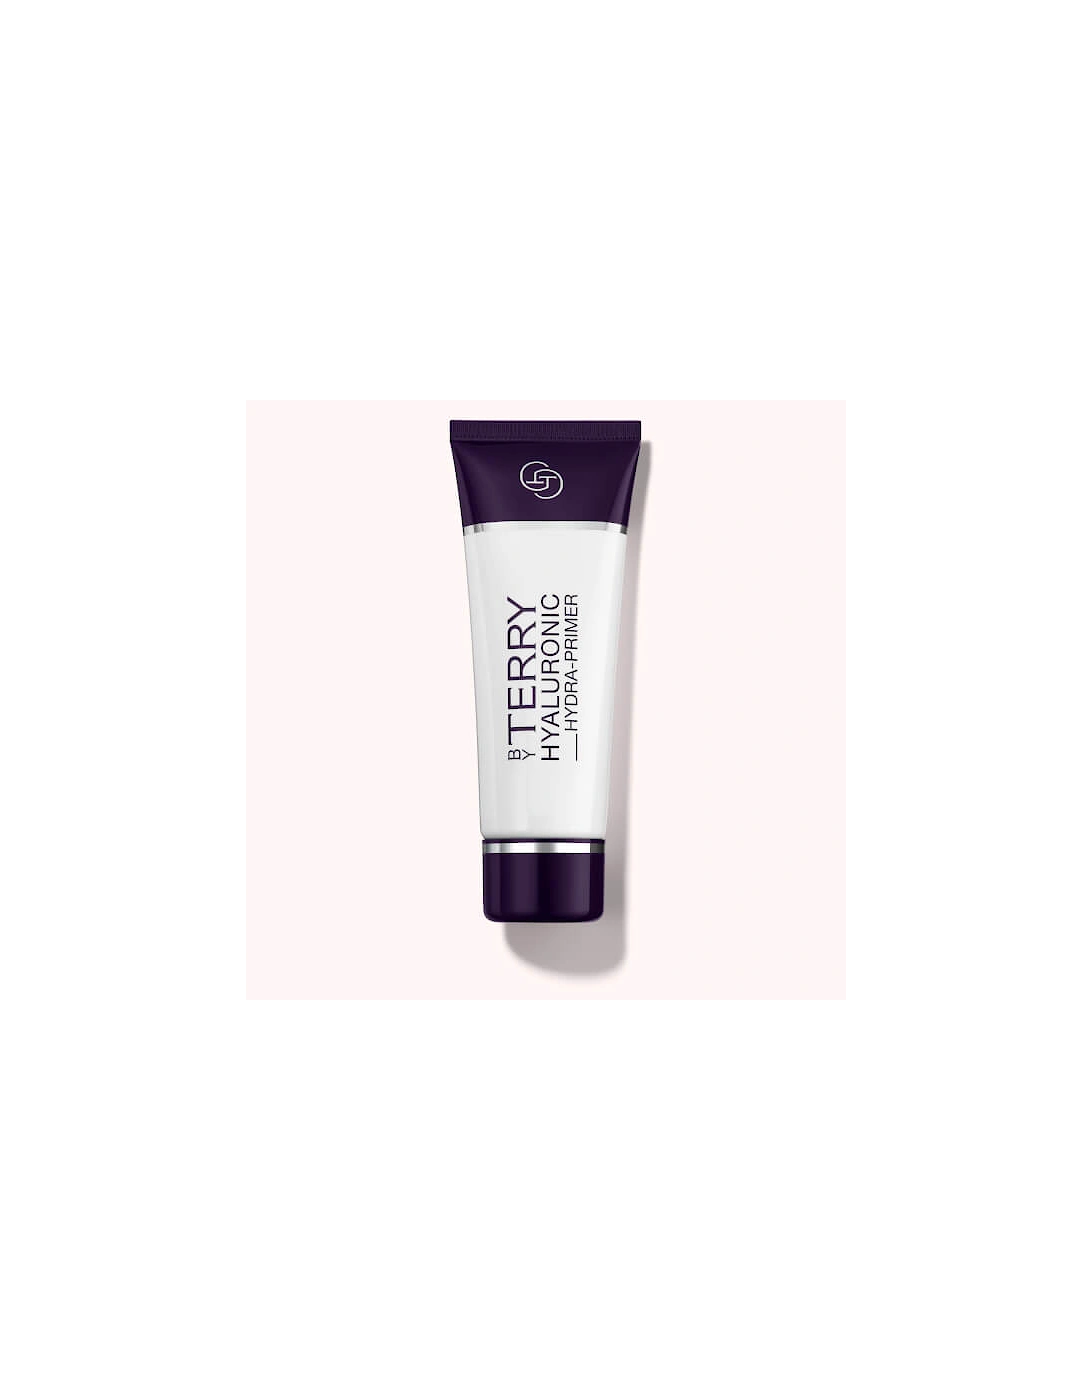 By Terry Hyaluronic Hydra-Primer 40ml